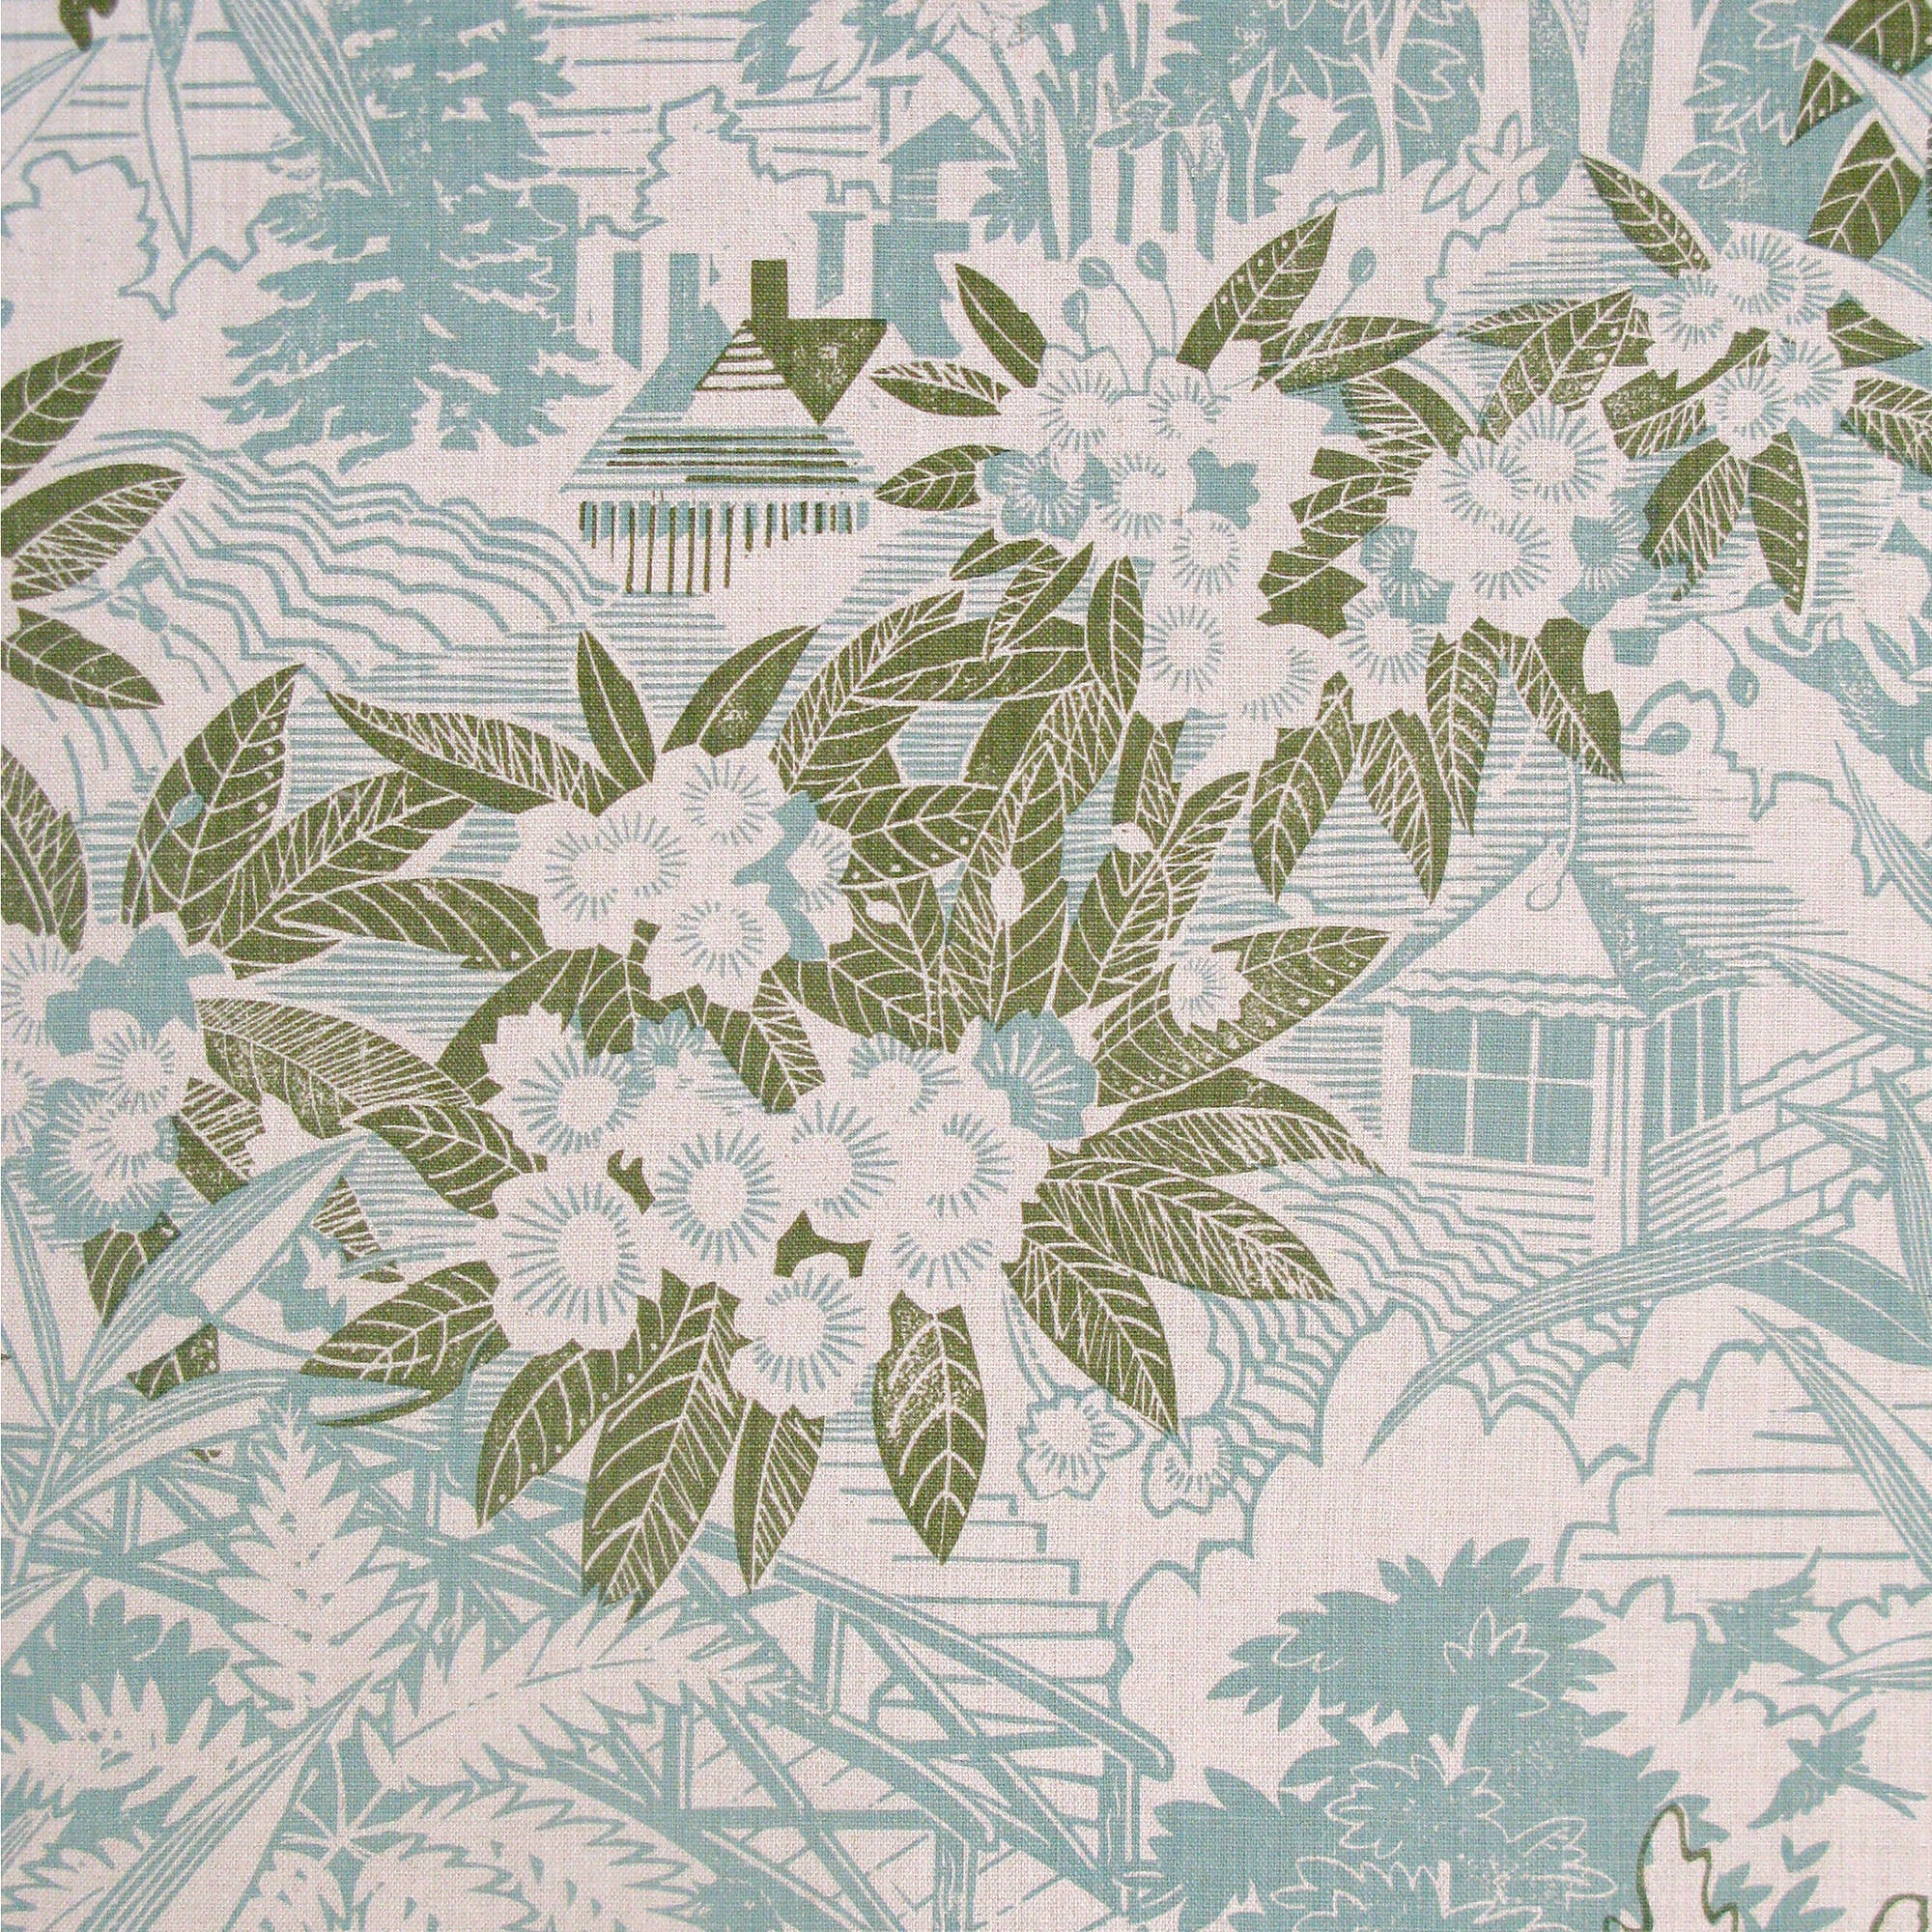 Detail of fabric in an intricate botanical, bridge and house print in sage and turquoise on a cream field.